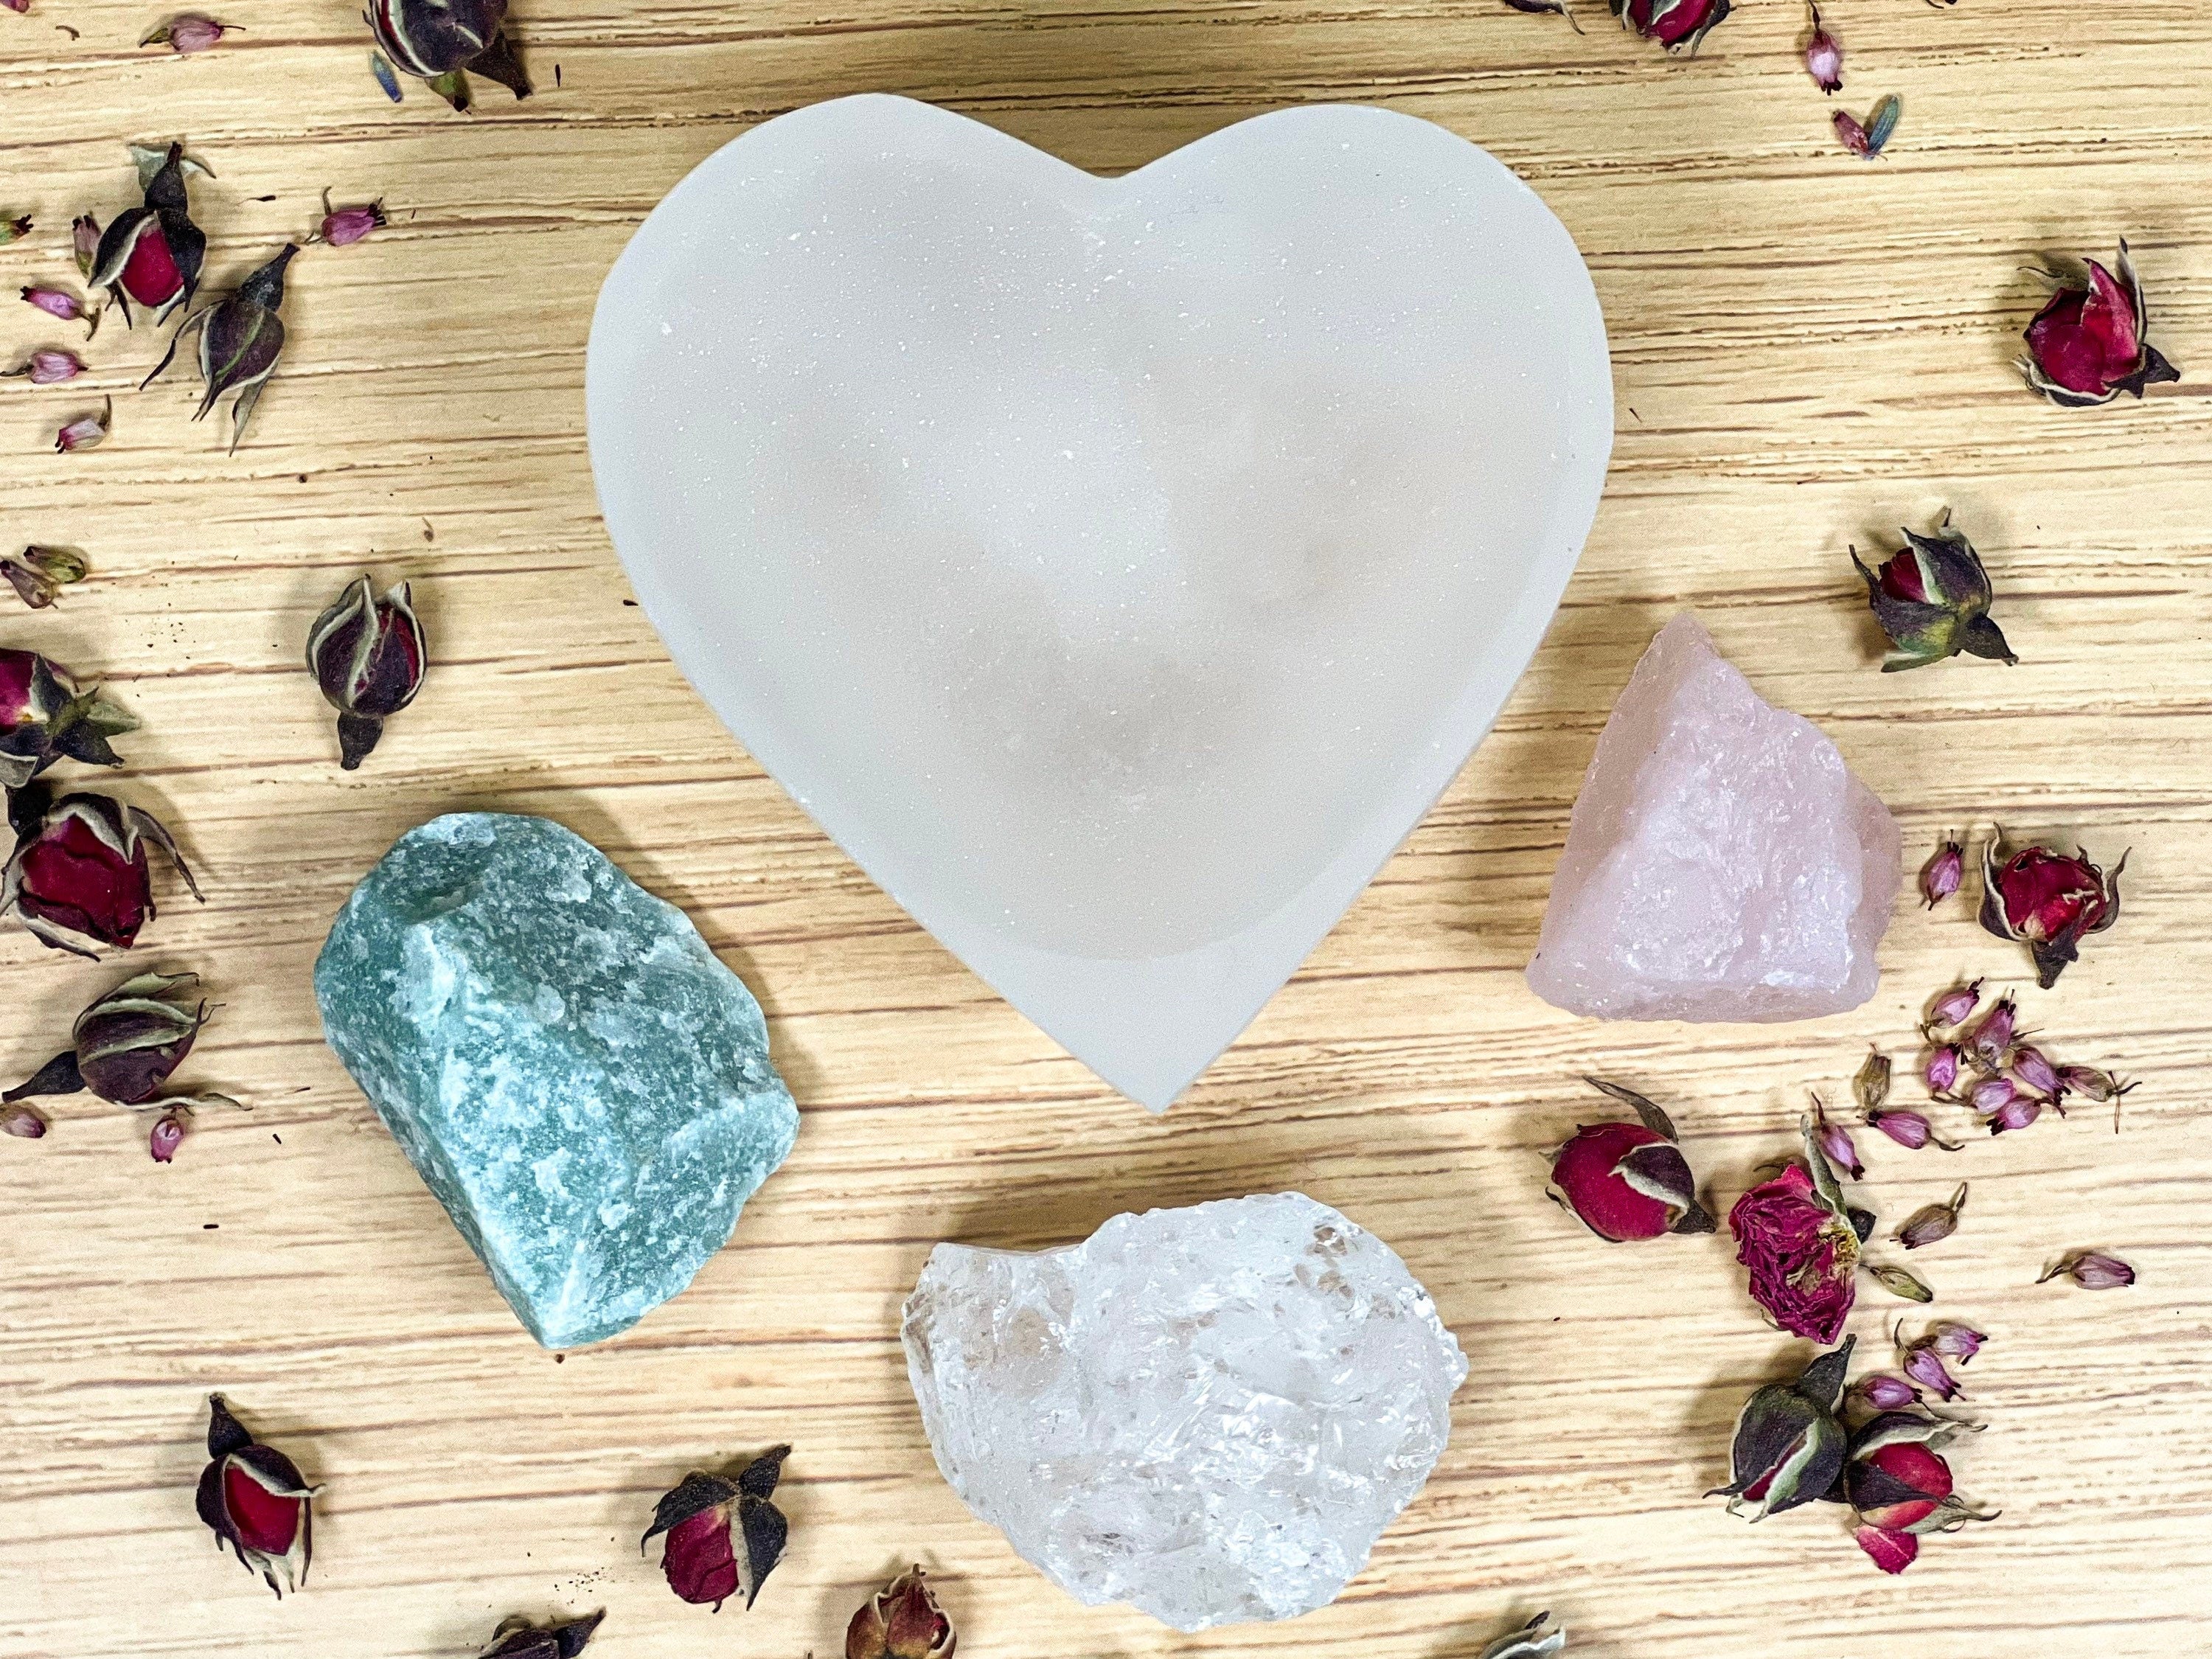 Self Love Crystals Set, Raw Love Crystals, Crystals Kit for Love, Manifesting Love Crystals Gift Box, Attract Love Crystal Set